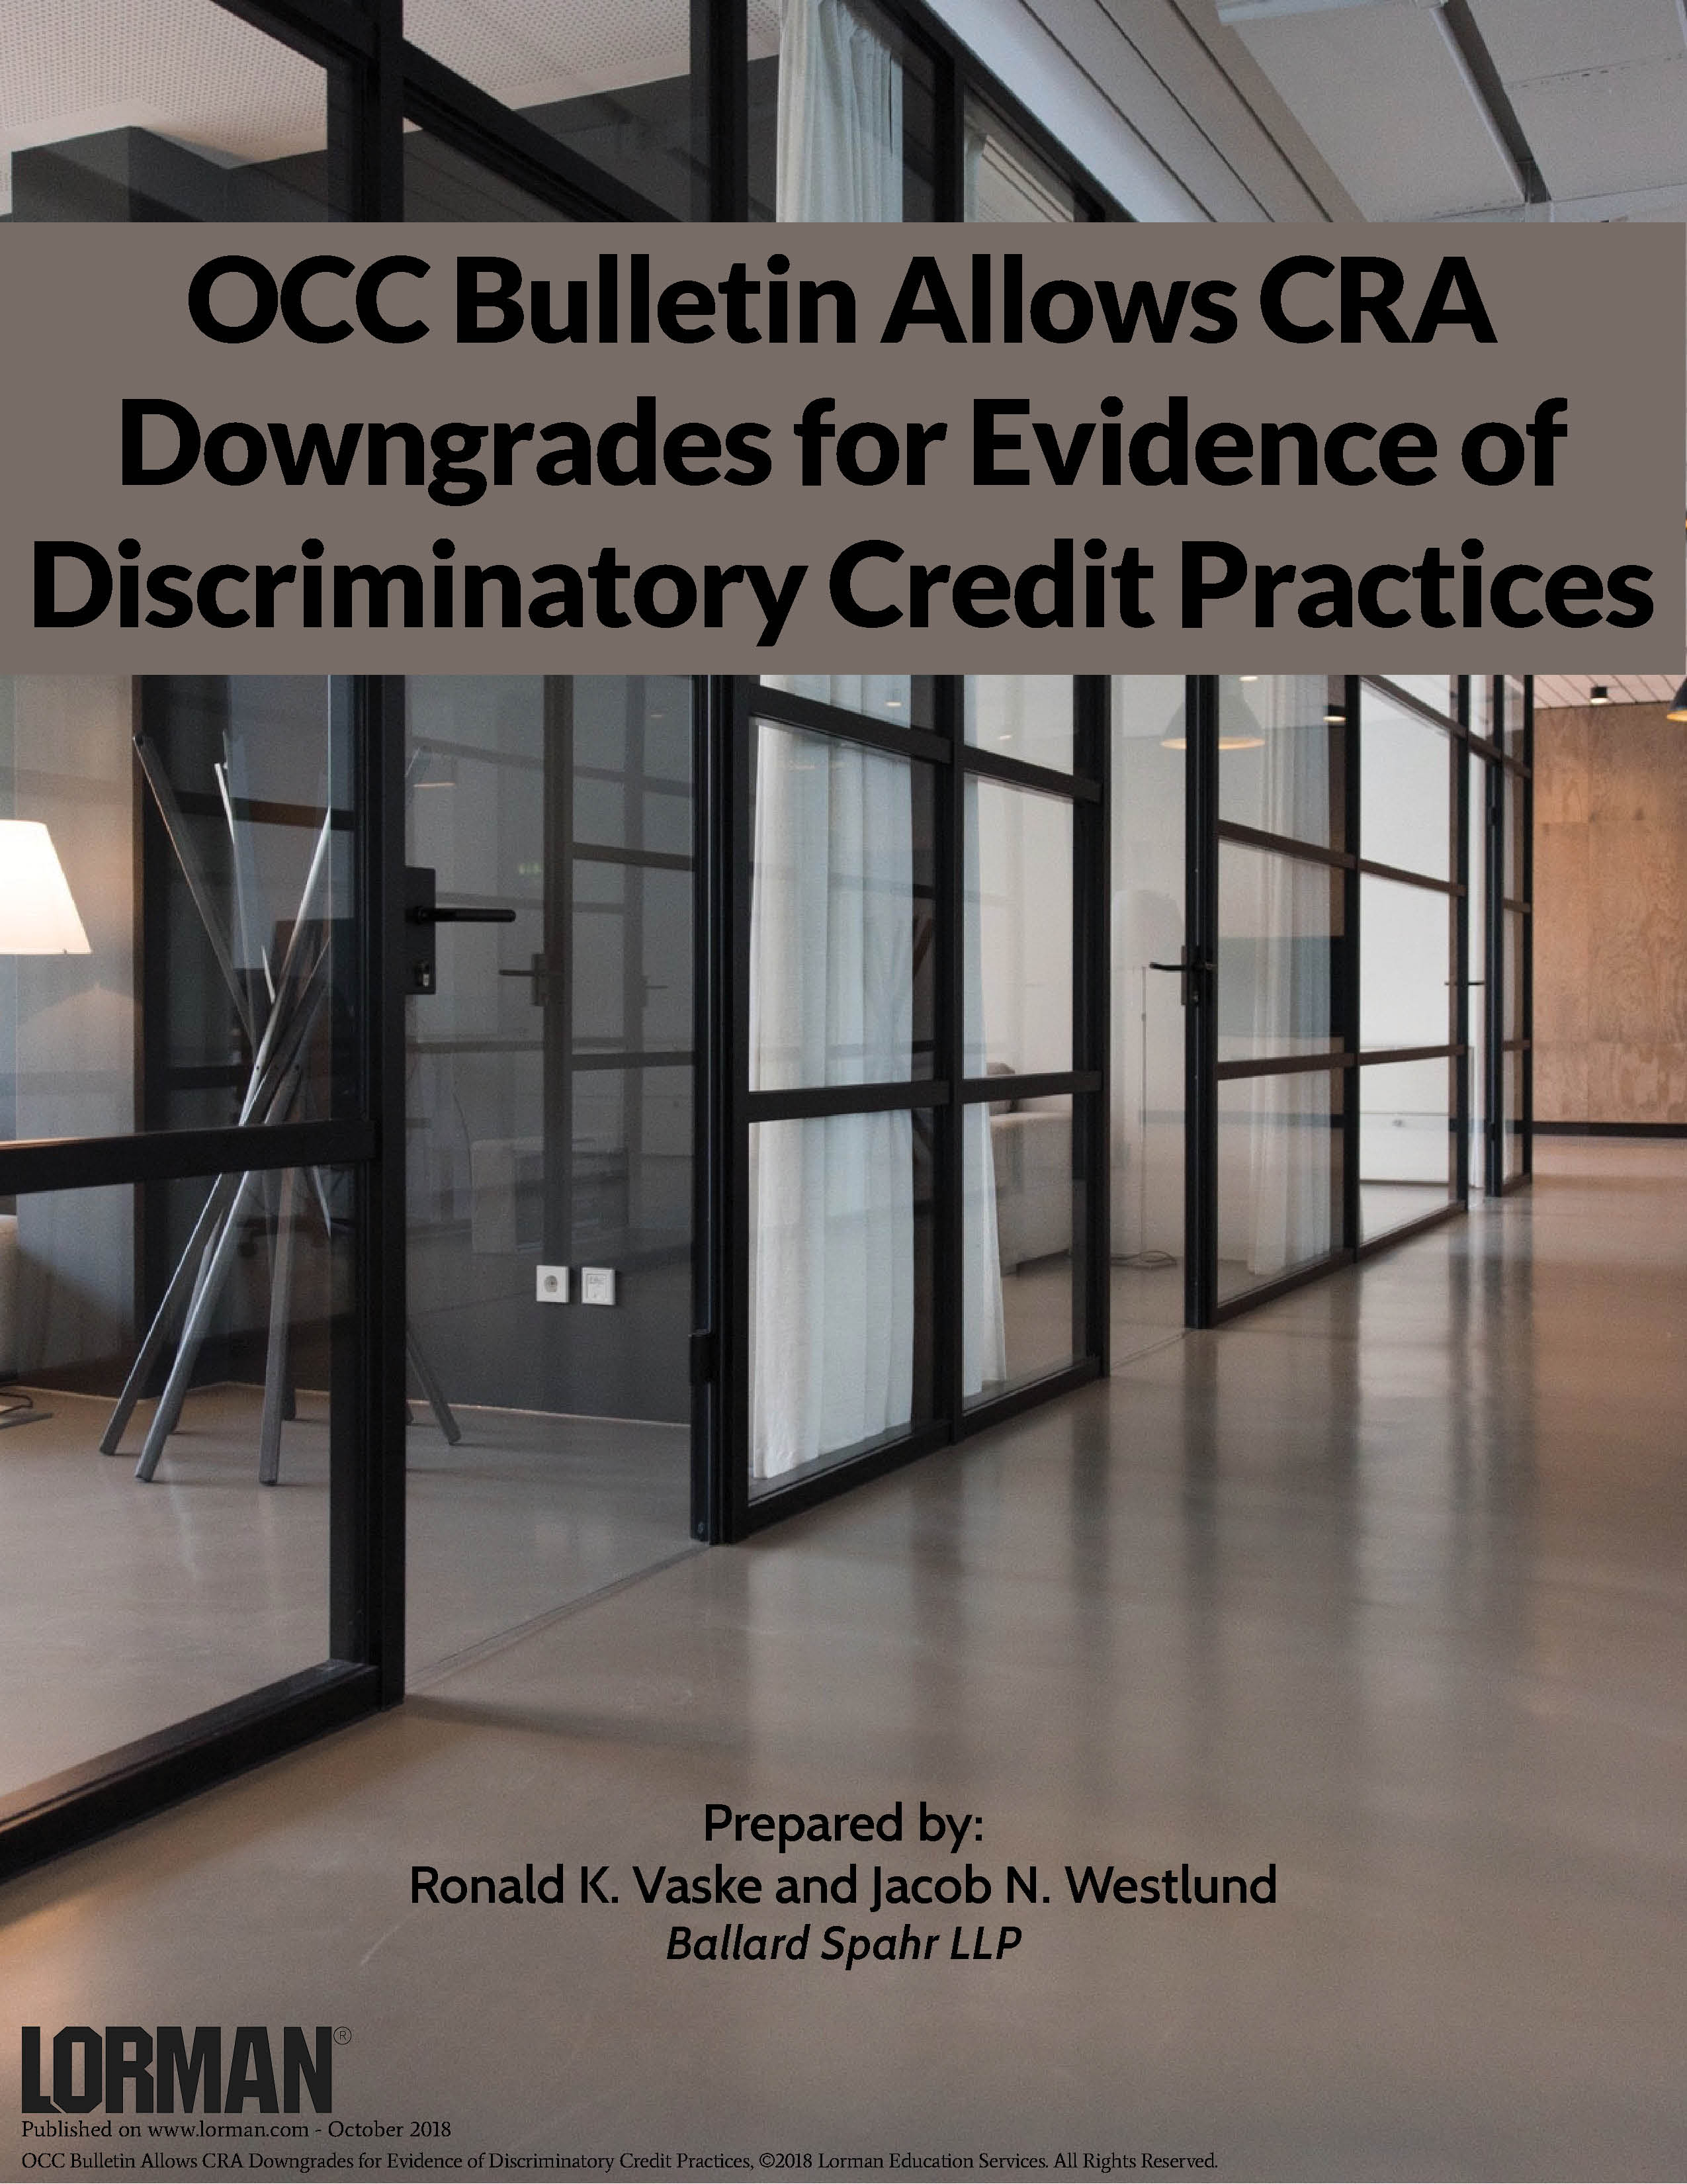 OCC Bulletin Allows CRA Downgrades for Evidence of Discriminatory Credit Practices